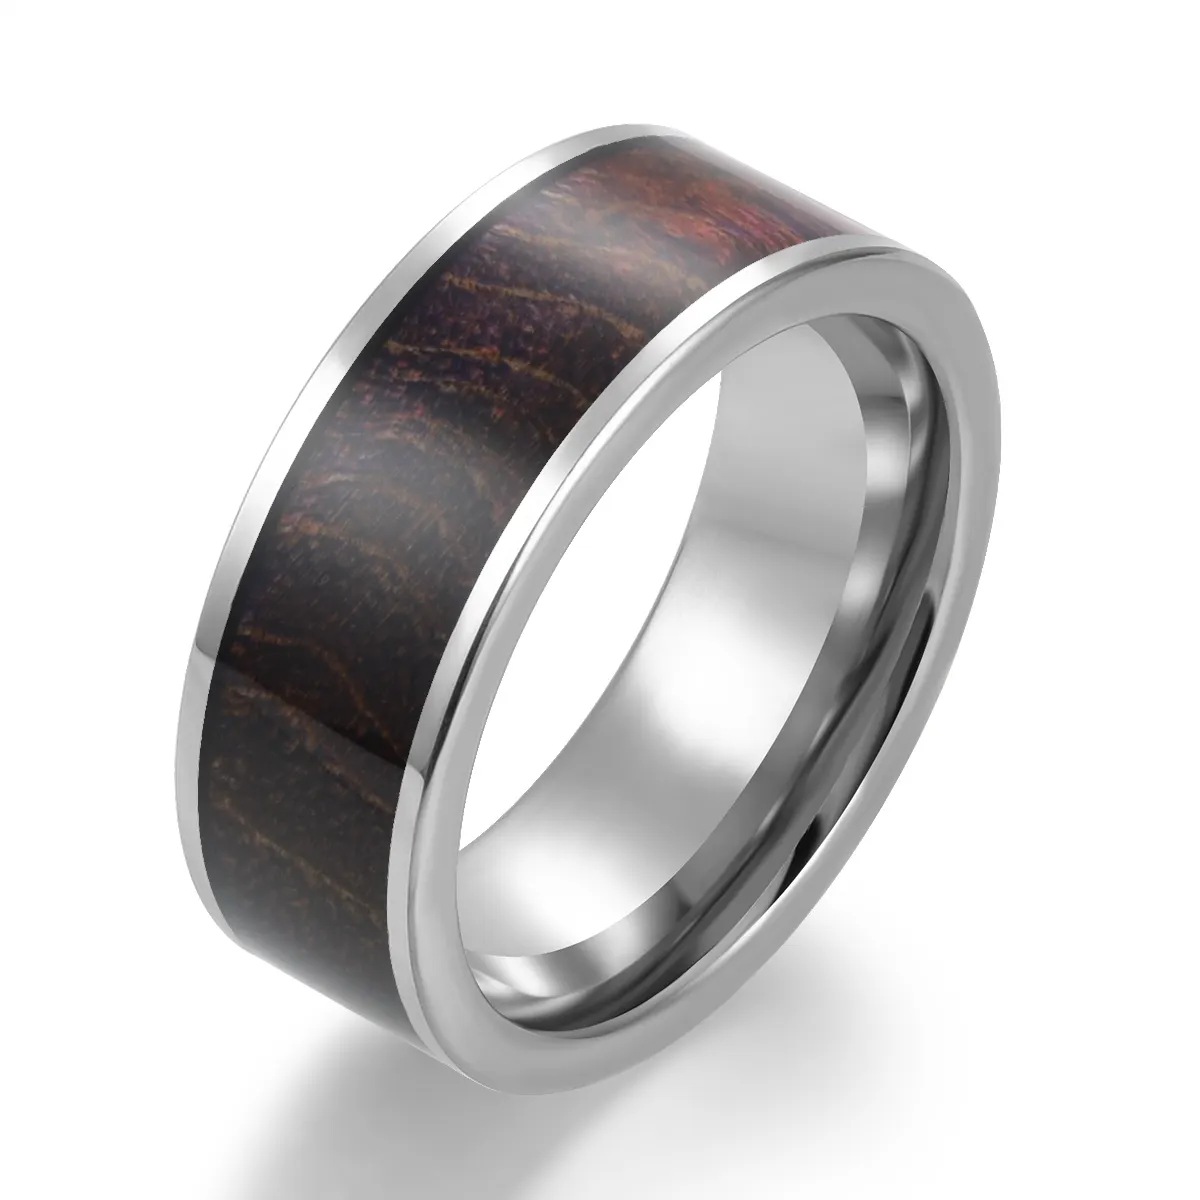 Gentdes Jewelry Modern Stylish Men's Sliver Tungsten Ring With Stable Wood Inlay Wedding Band Fashion Men Ring